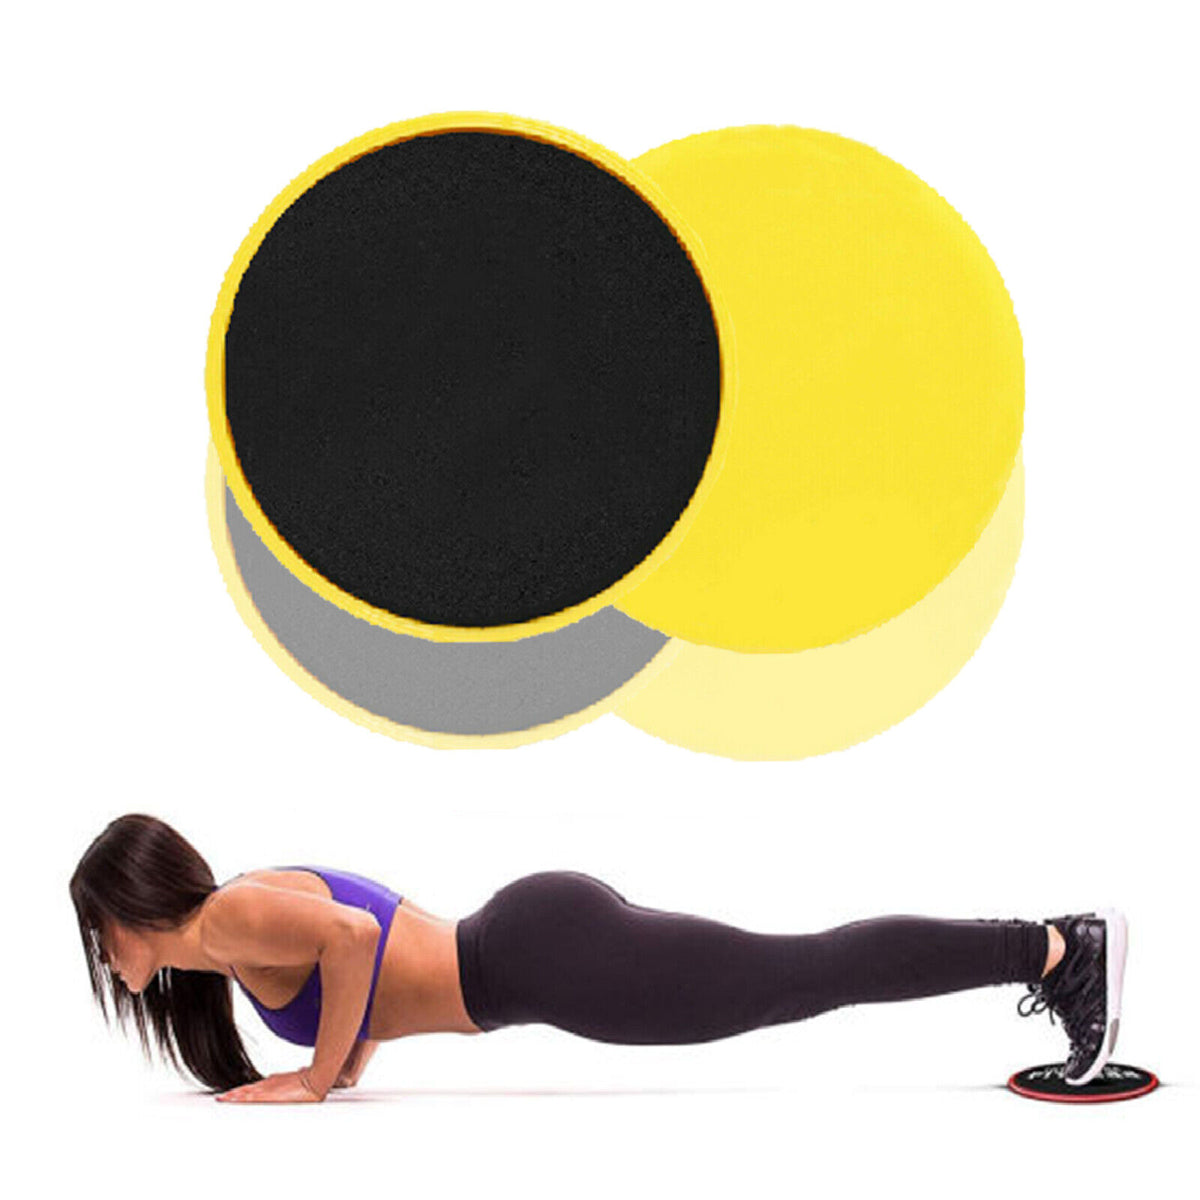  2 x Dual Sided Gliding Discs Exercise Sliders Core